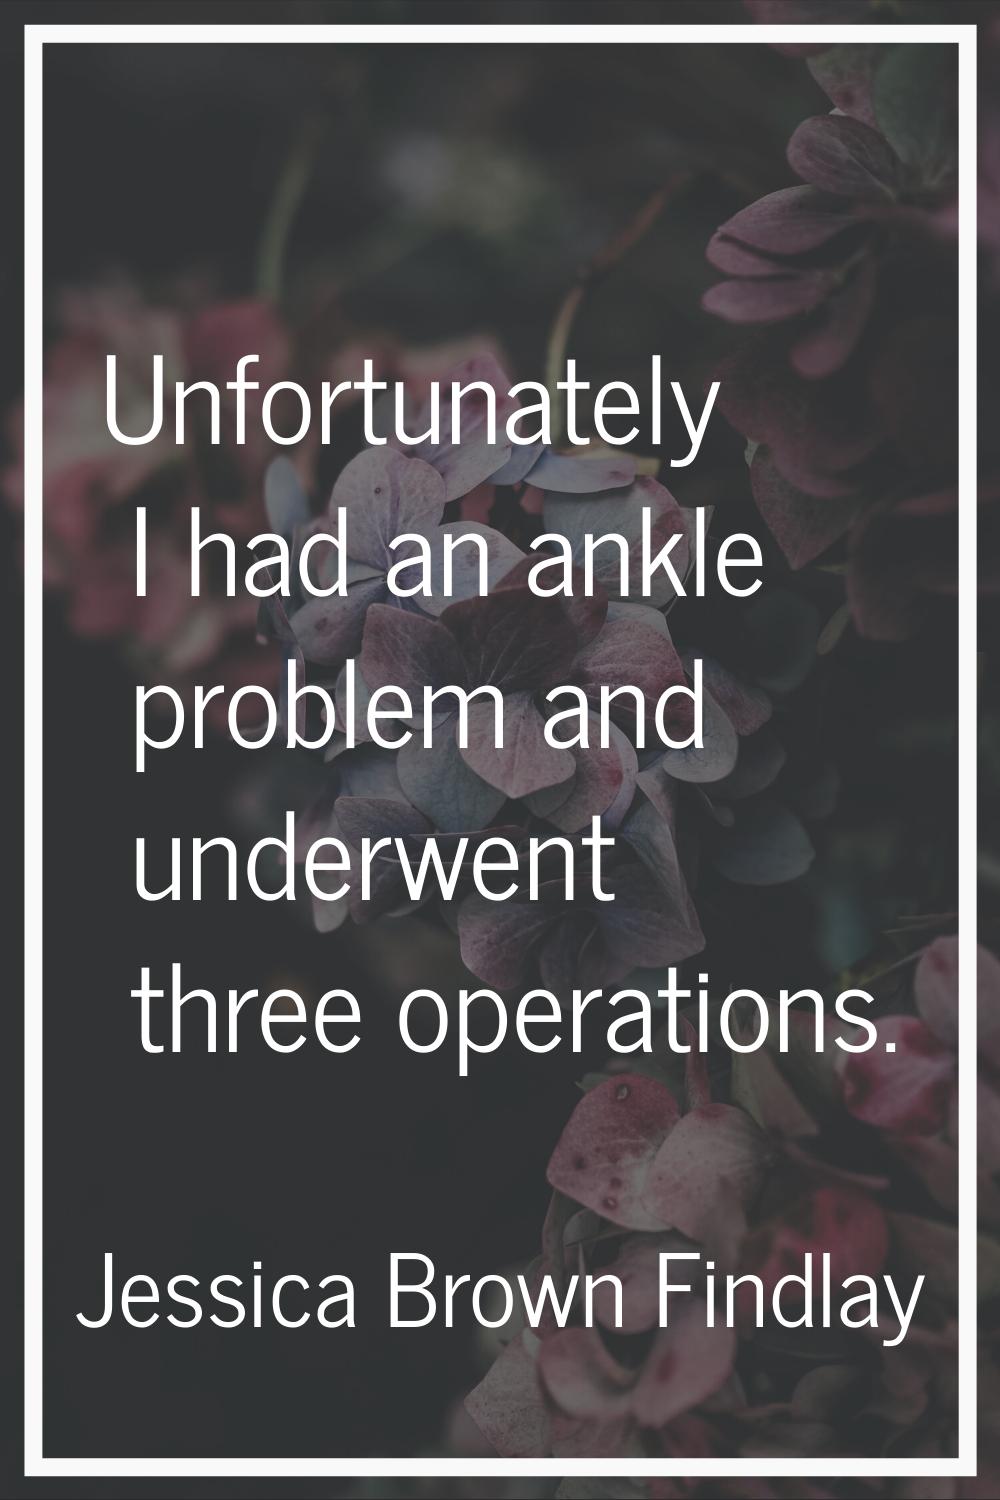 Unfortunately I had an ankle problem and underwent three operations.